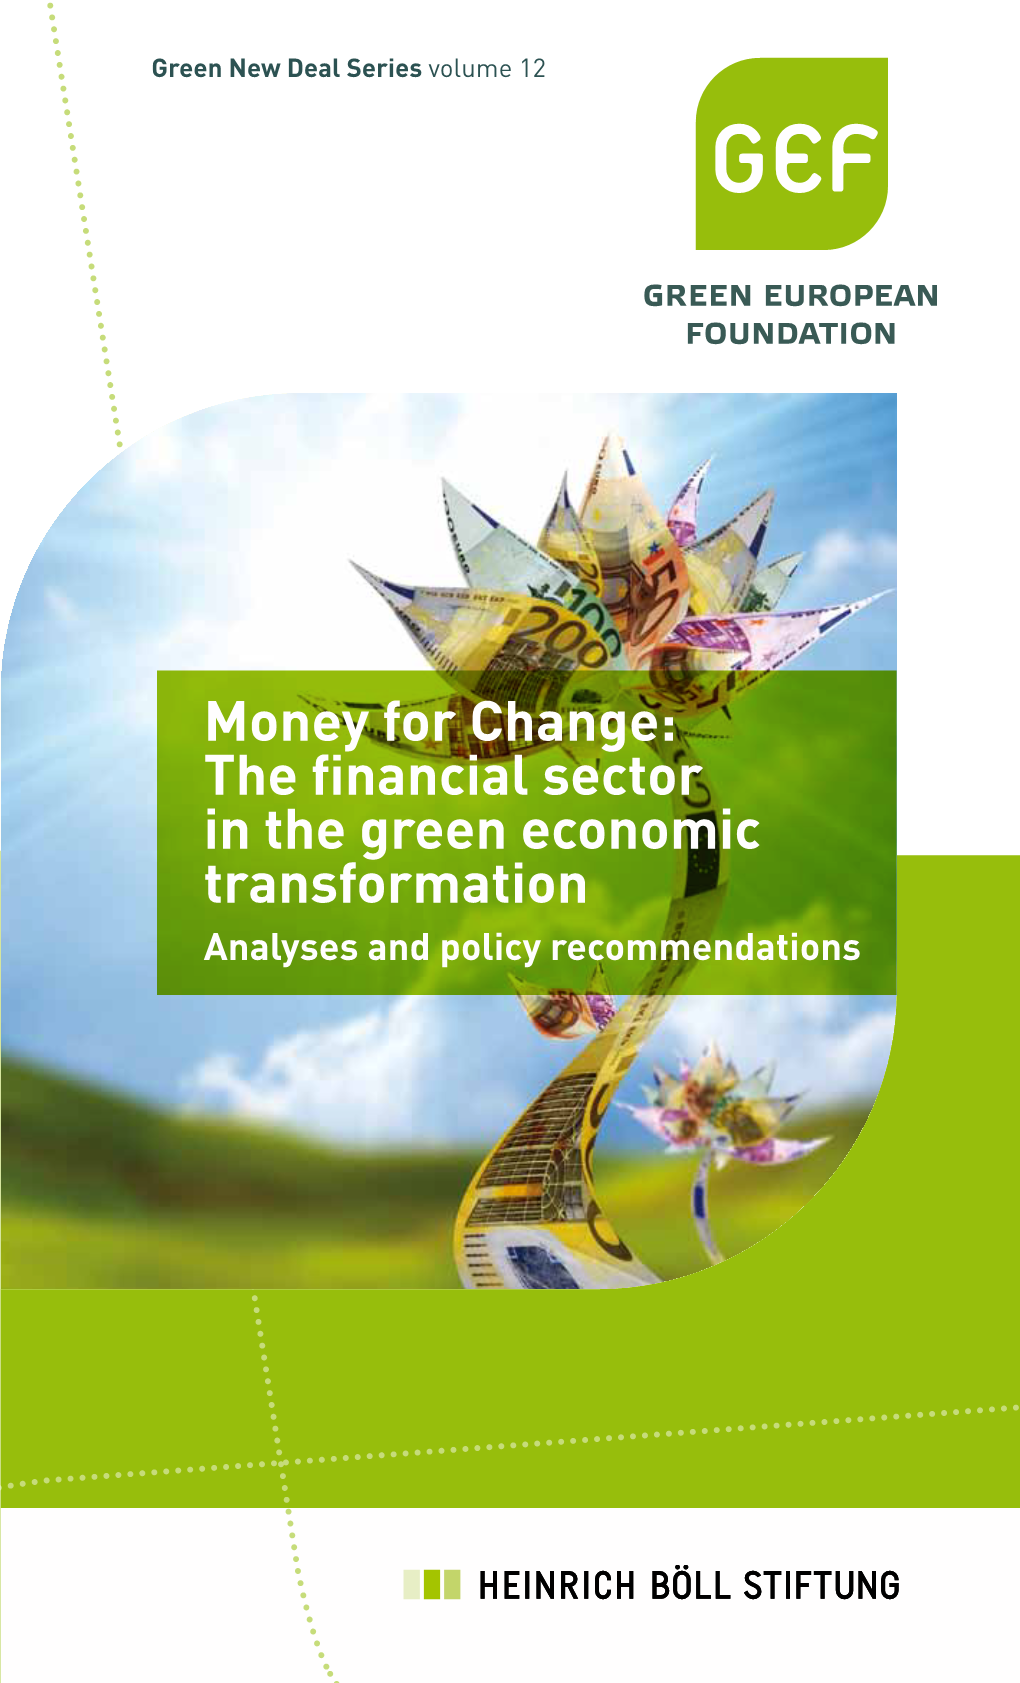 The Financial Sector in the Green Economic Transformation Analyses and Policy Recommendations